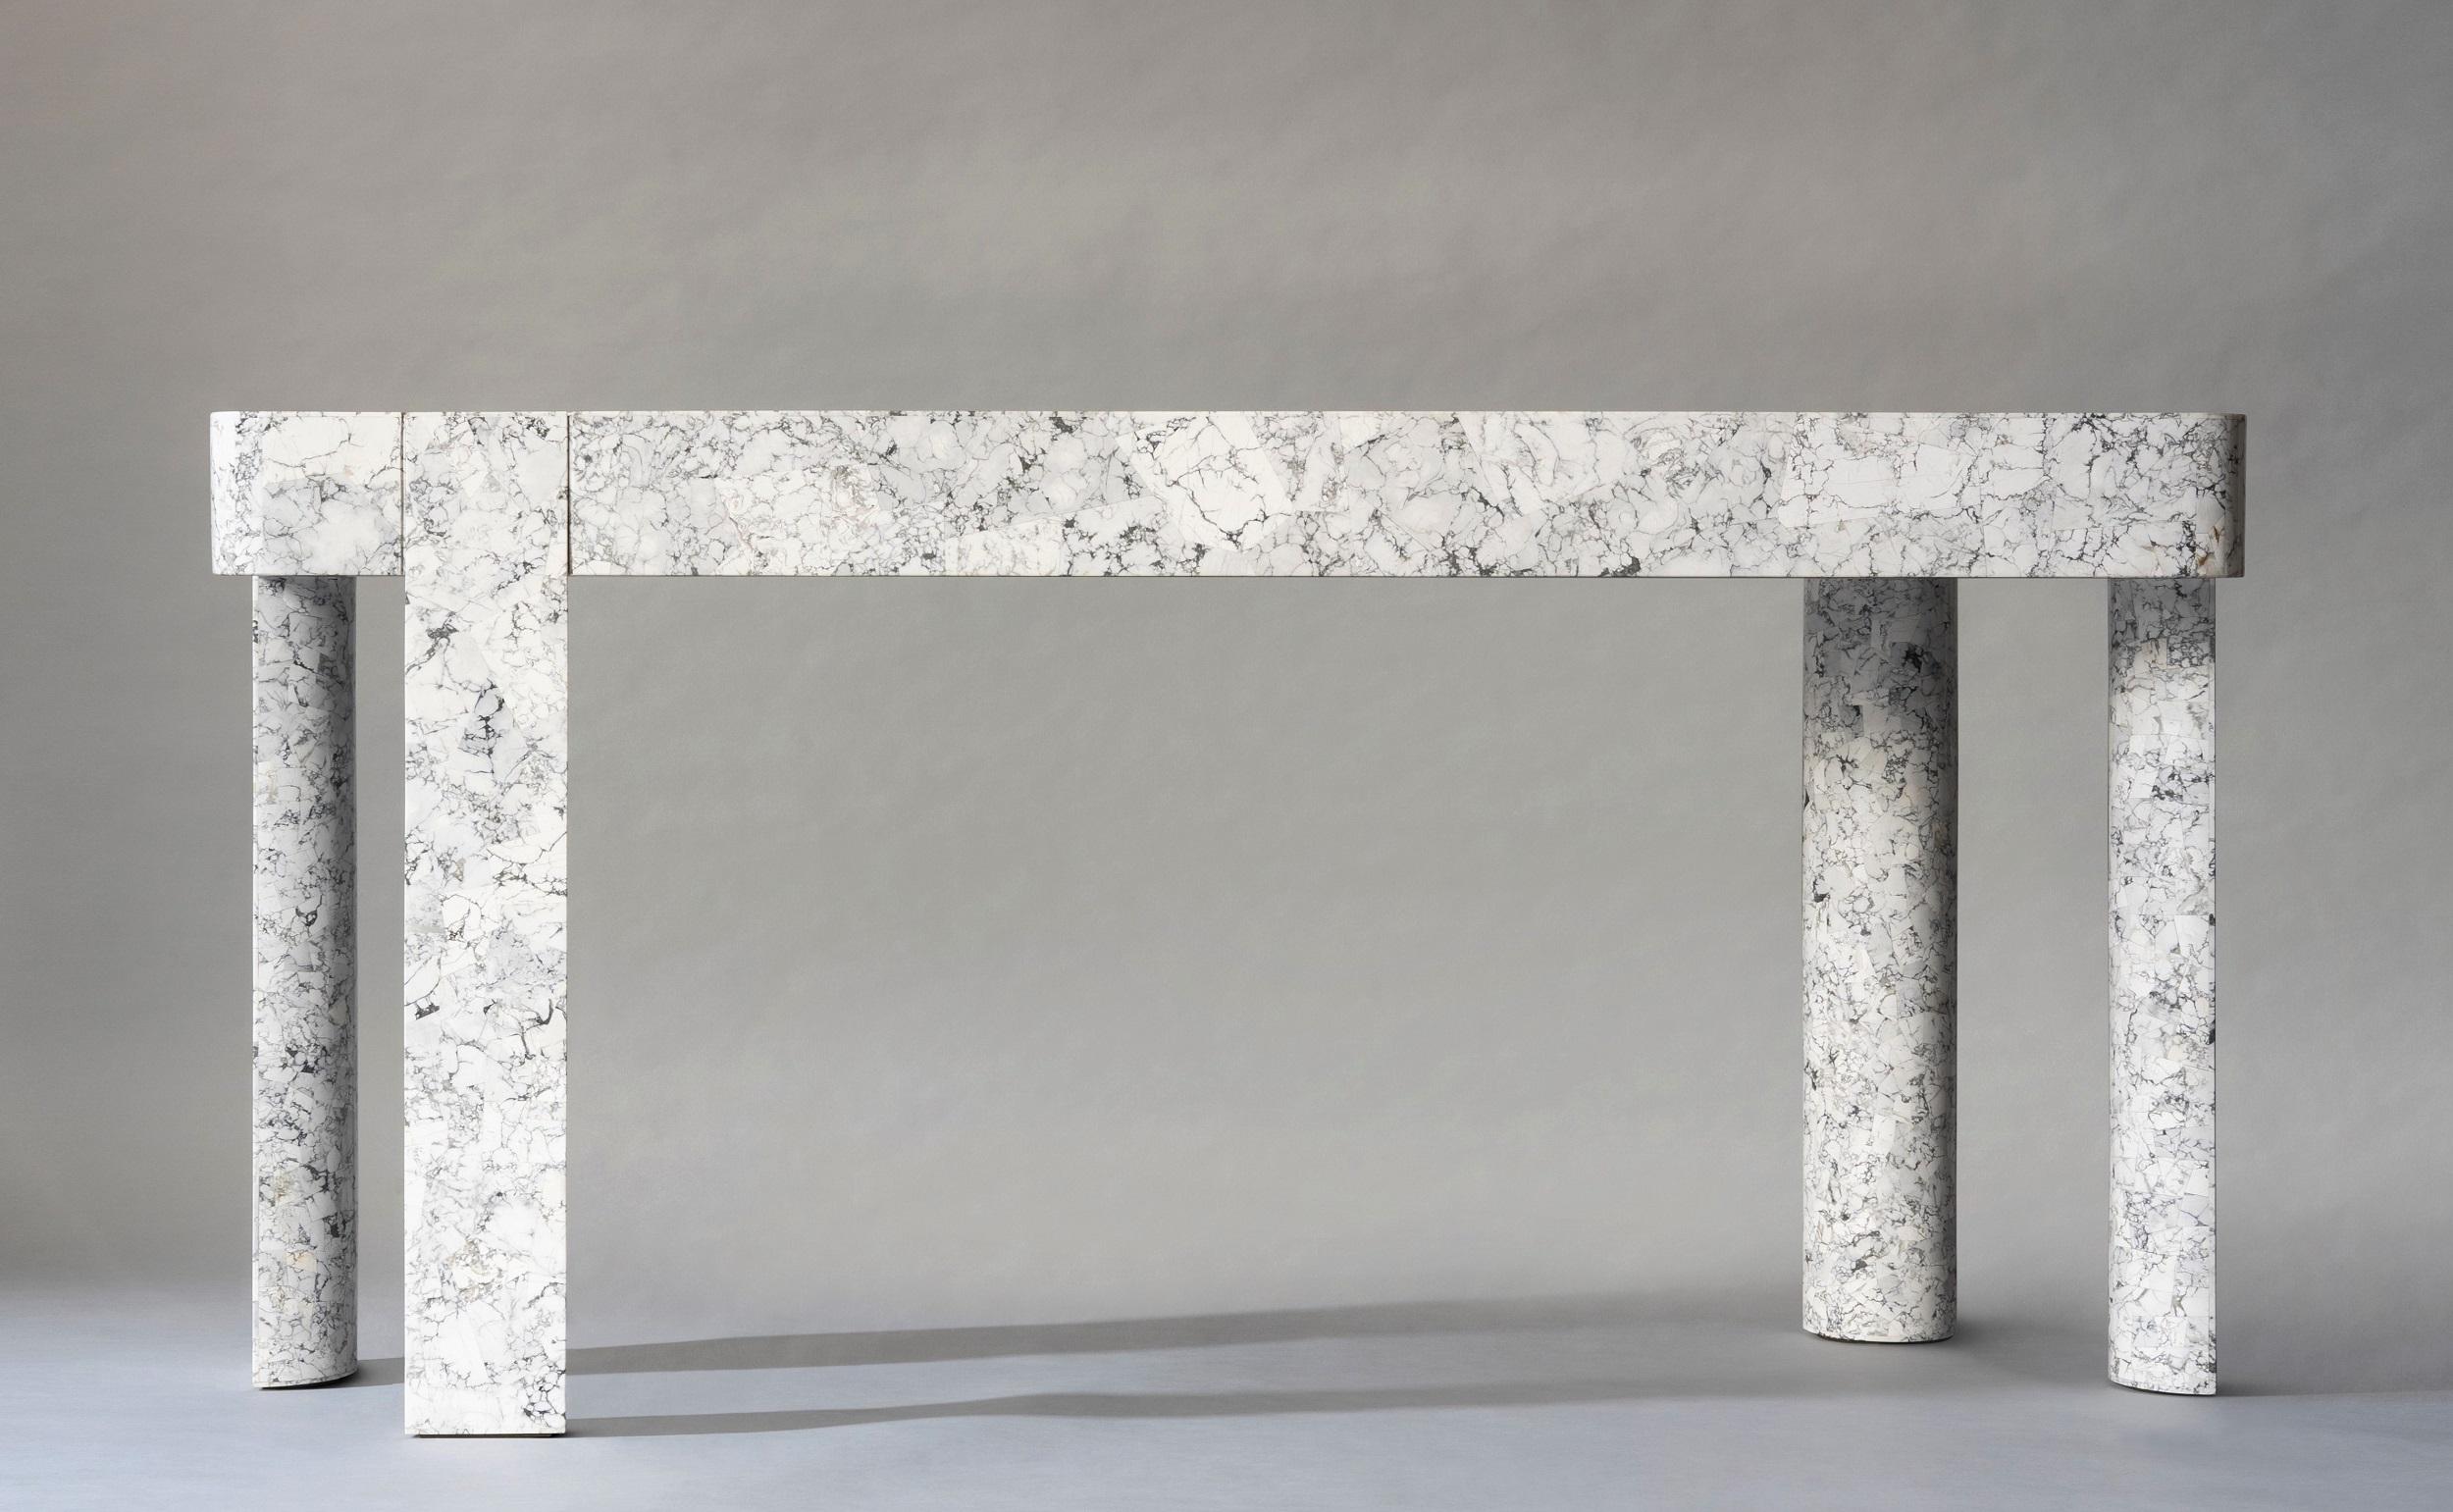 The Demi Console contrasts clean-lined elegance with the organic beauty of natural stone. Exquisite stone marquetry, hand-laid by our master craftsmen, creates a dynamic display of pattern and coloration in an otherwise minimal design. Careful